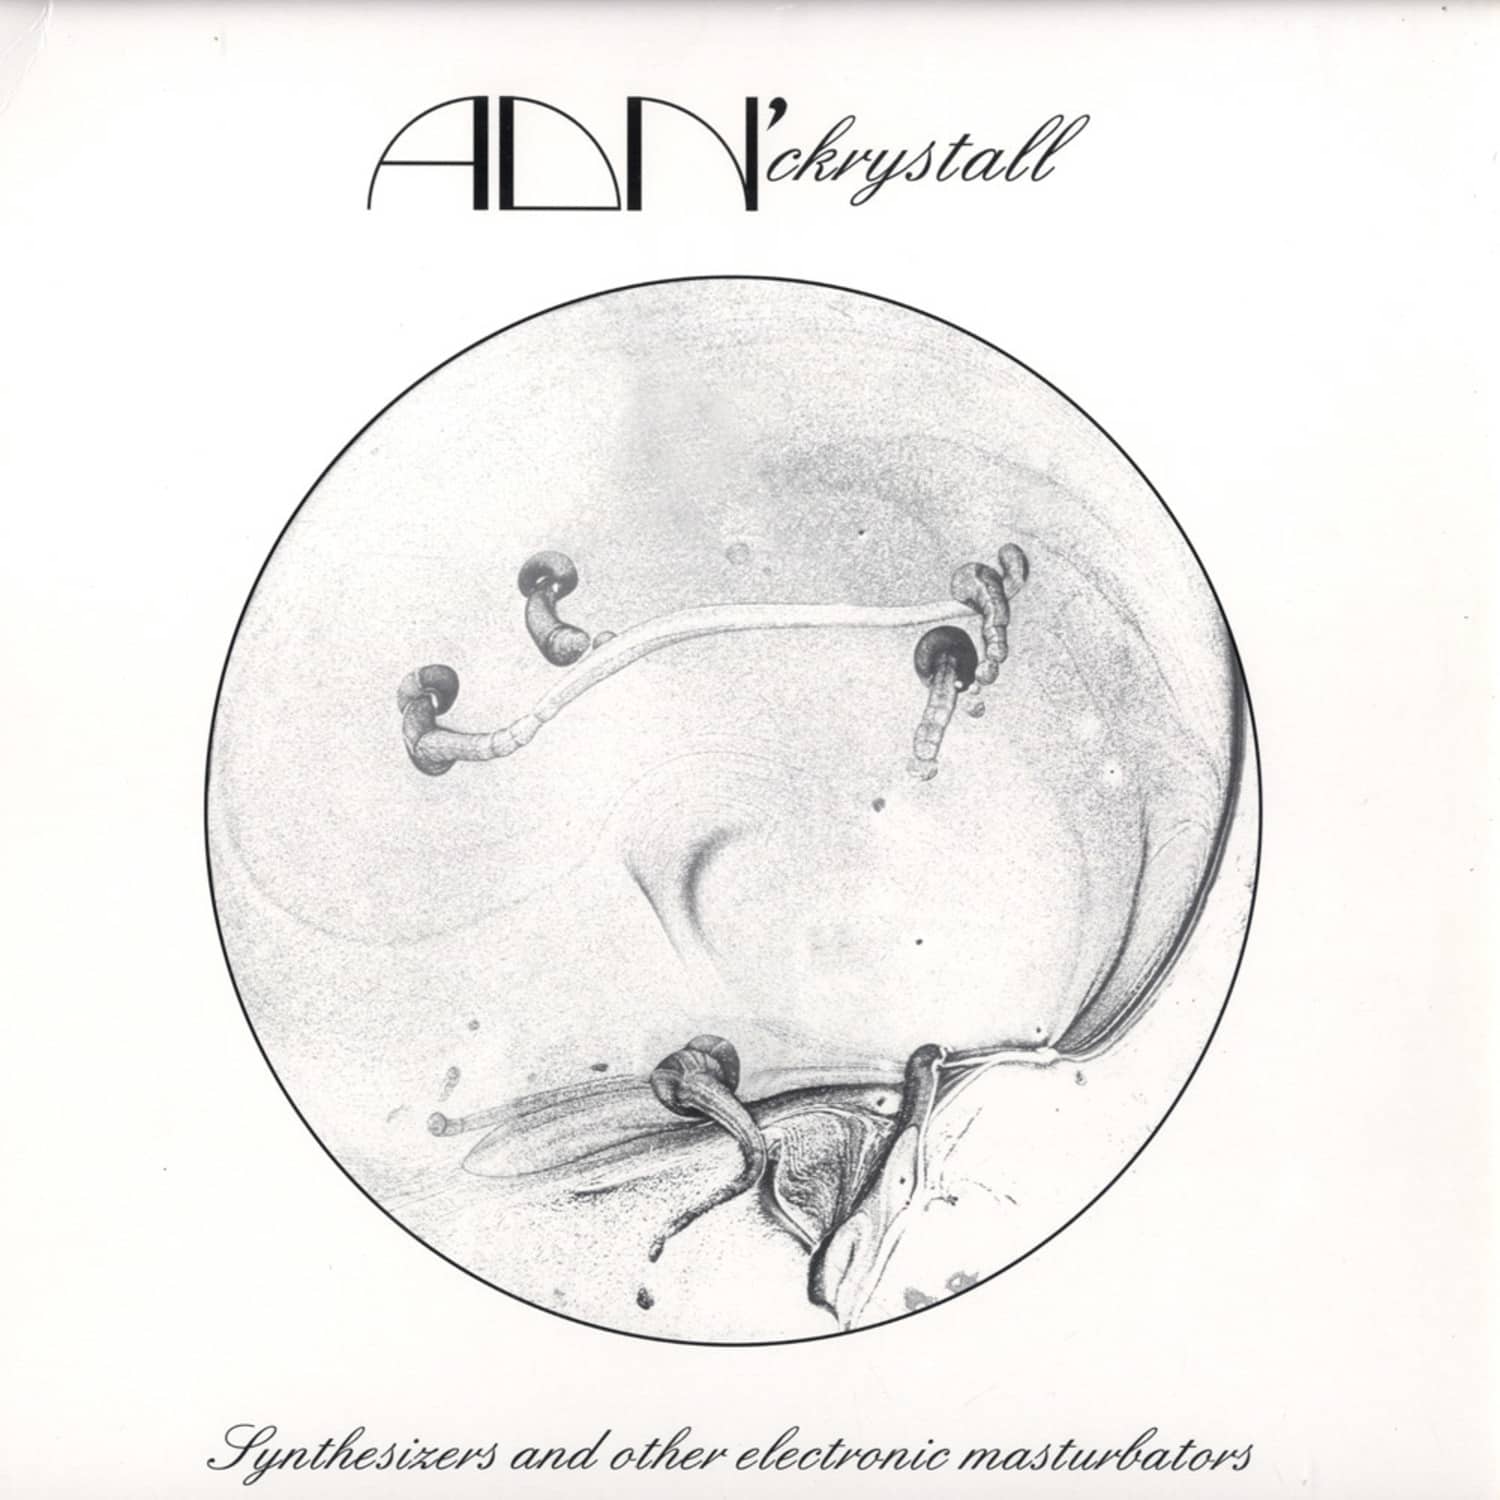 Adn Ckrystall - SYNTHESIZERS AND OTHER ELECTRONIC MASTURBATORS